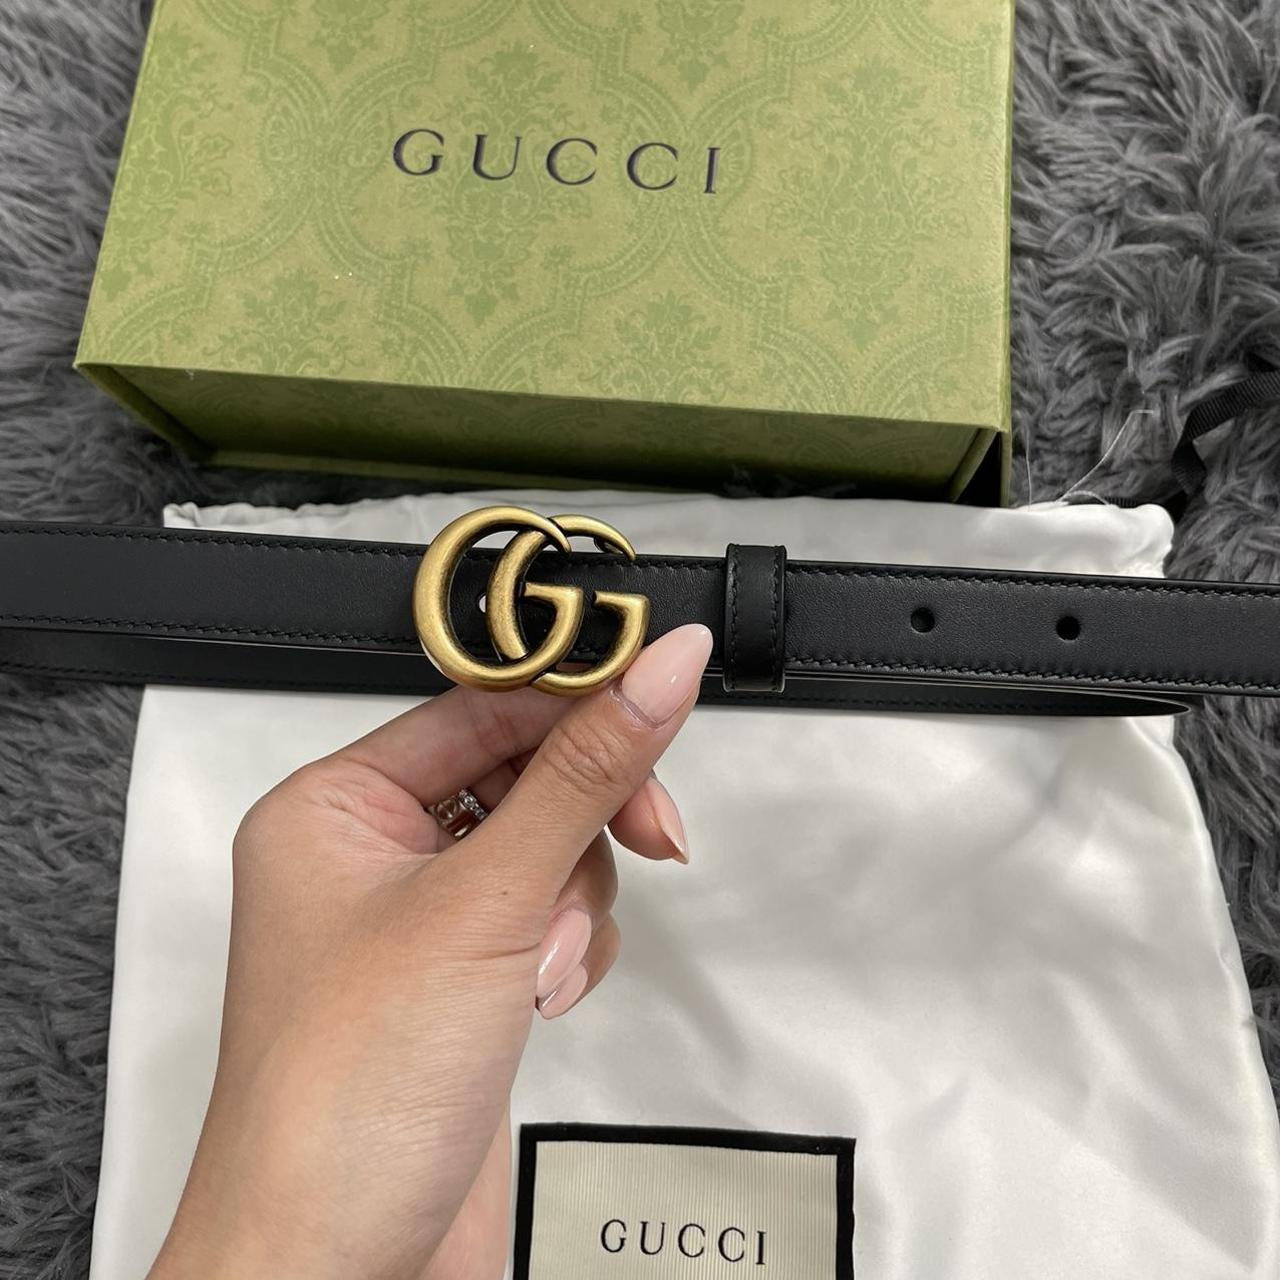 NEW Gucci Leather Belt with Double G Gold Buckle - Depop